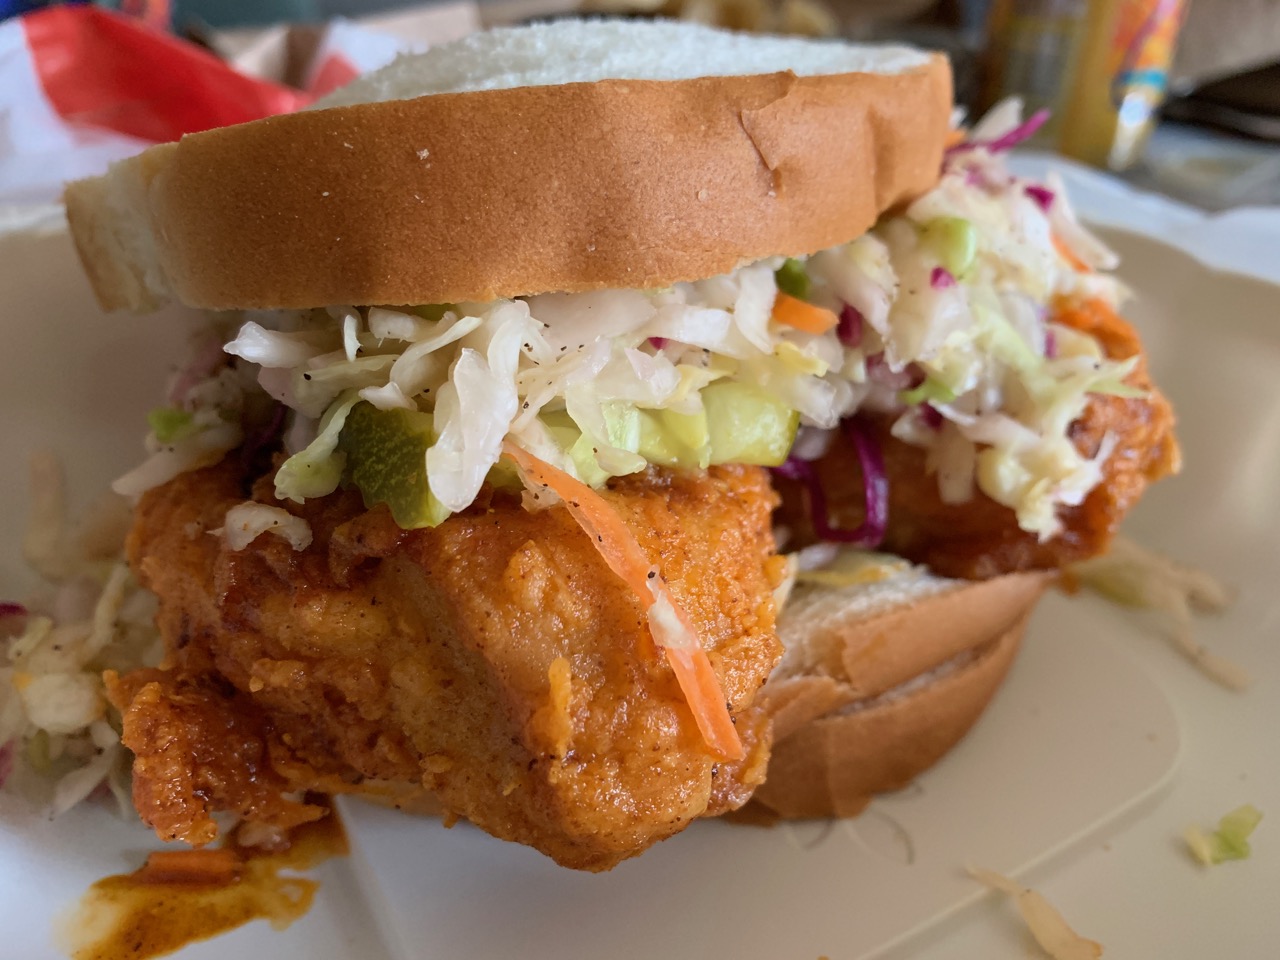 Sandwich topped with fried chicken and cole slaw from Hot Chicken Takeover